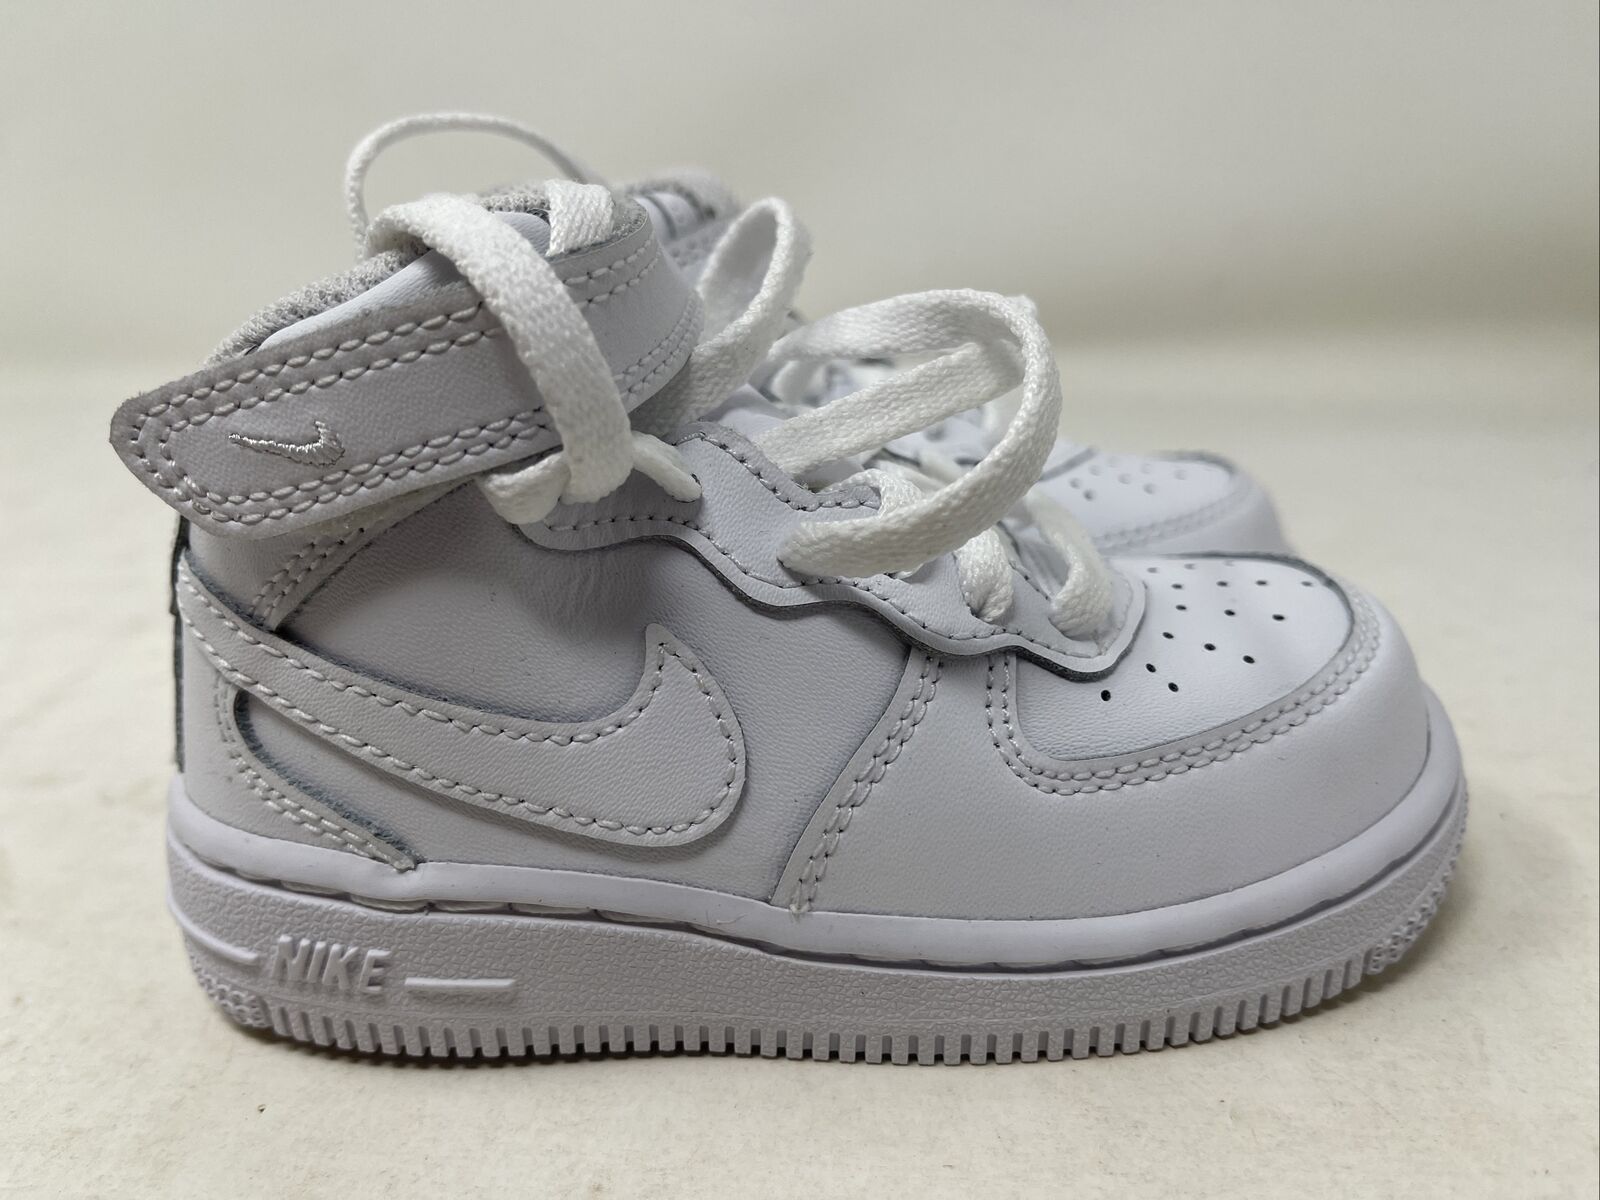 Nike Unisex Toddler Air Force One Mid (TD)Shoes White 314197-113 Shoes Size 7C